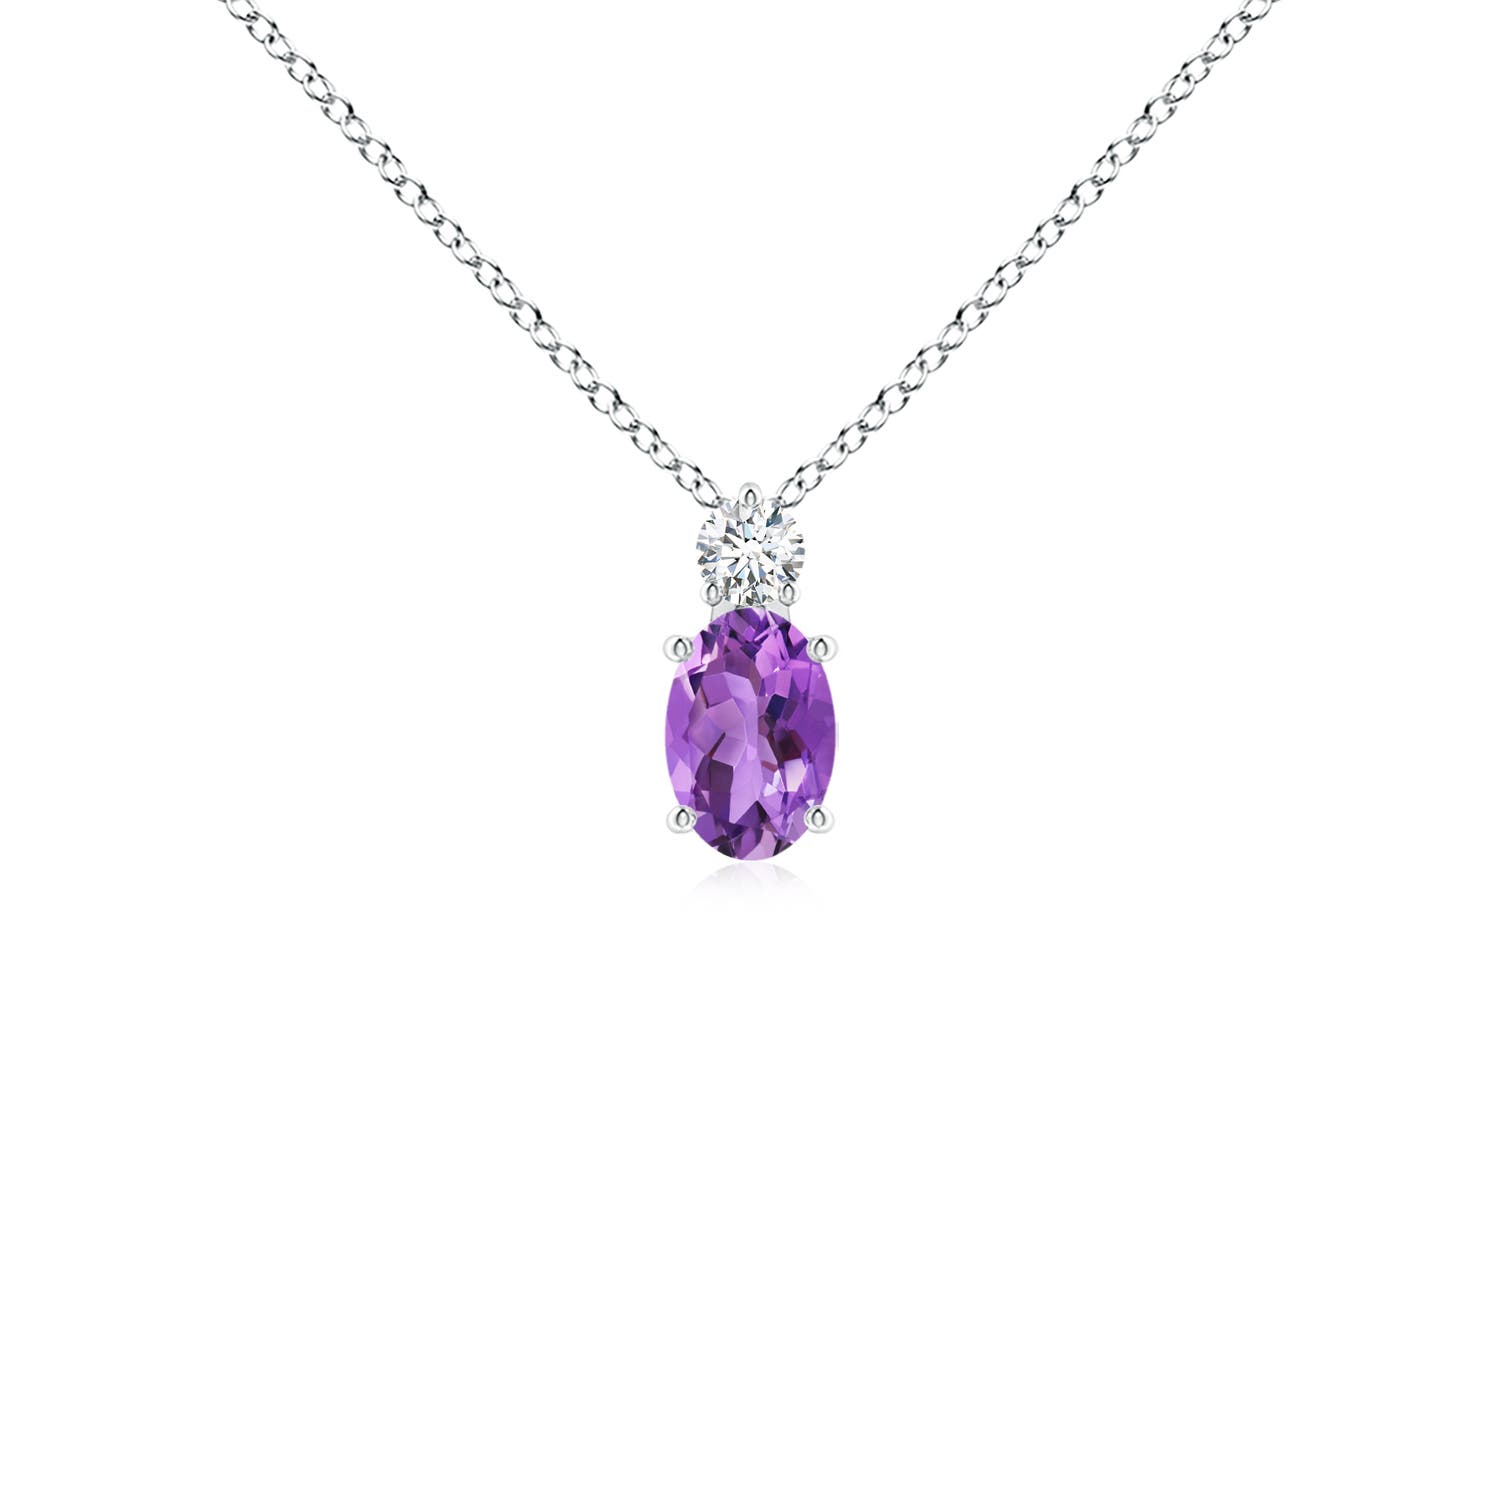 AA - Amethyst / 0.47 CT / 14 KT White Gold